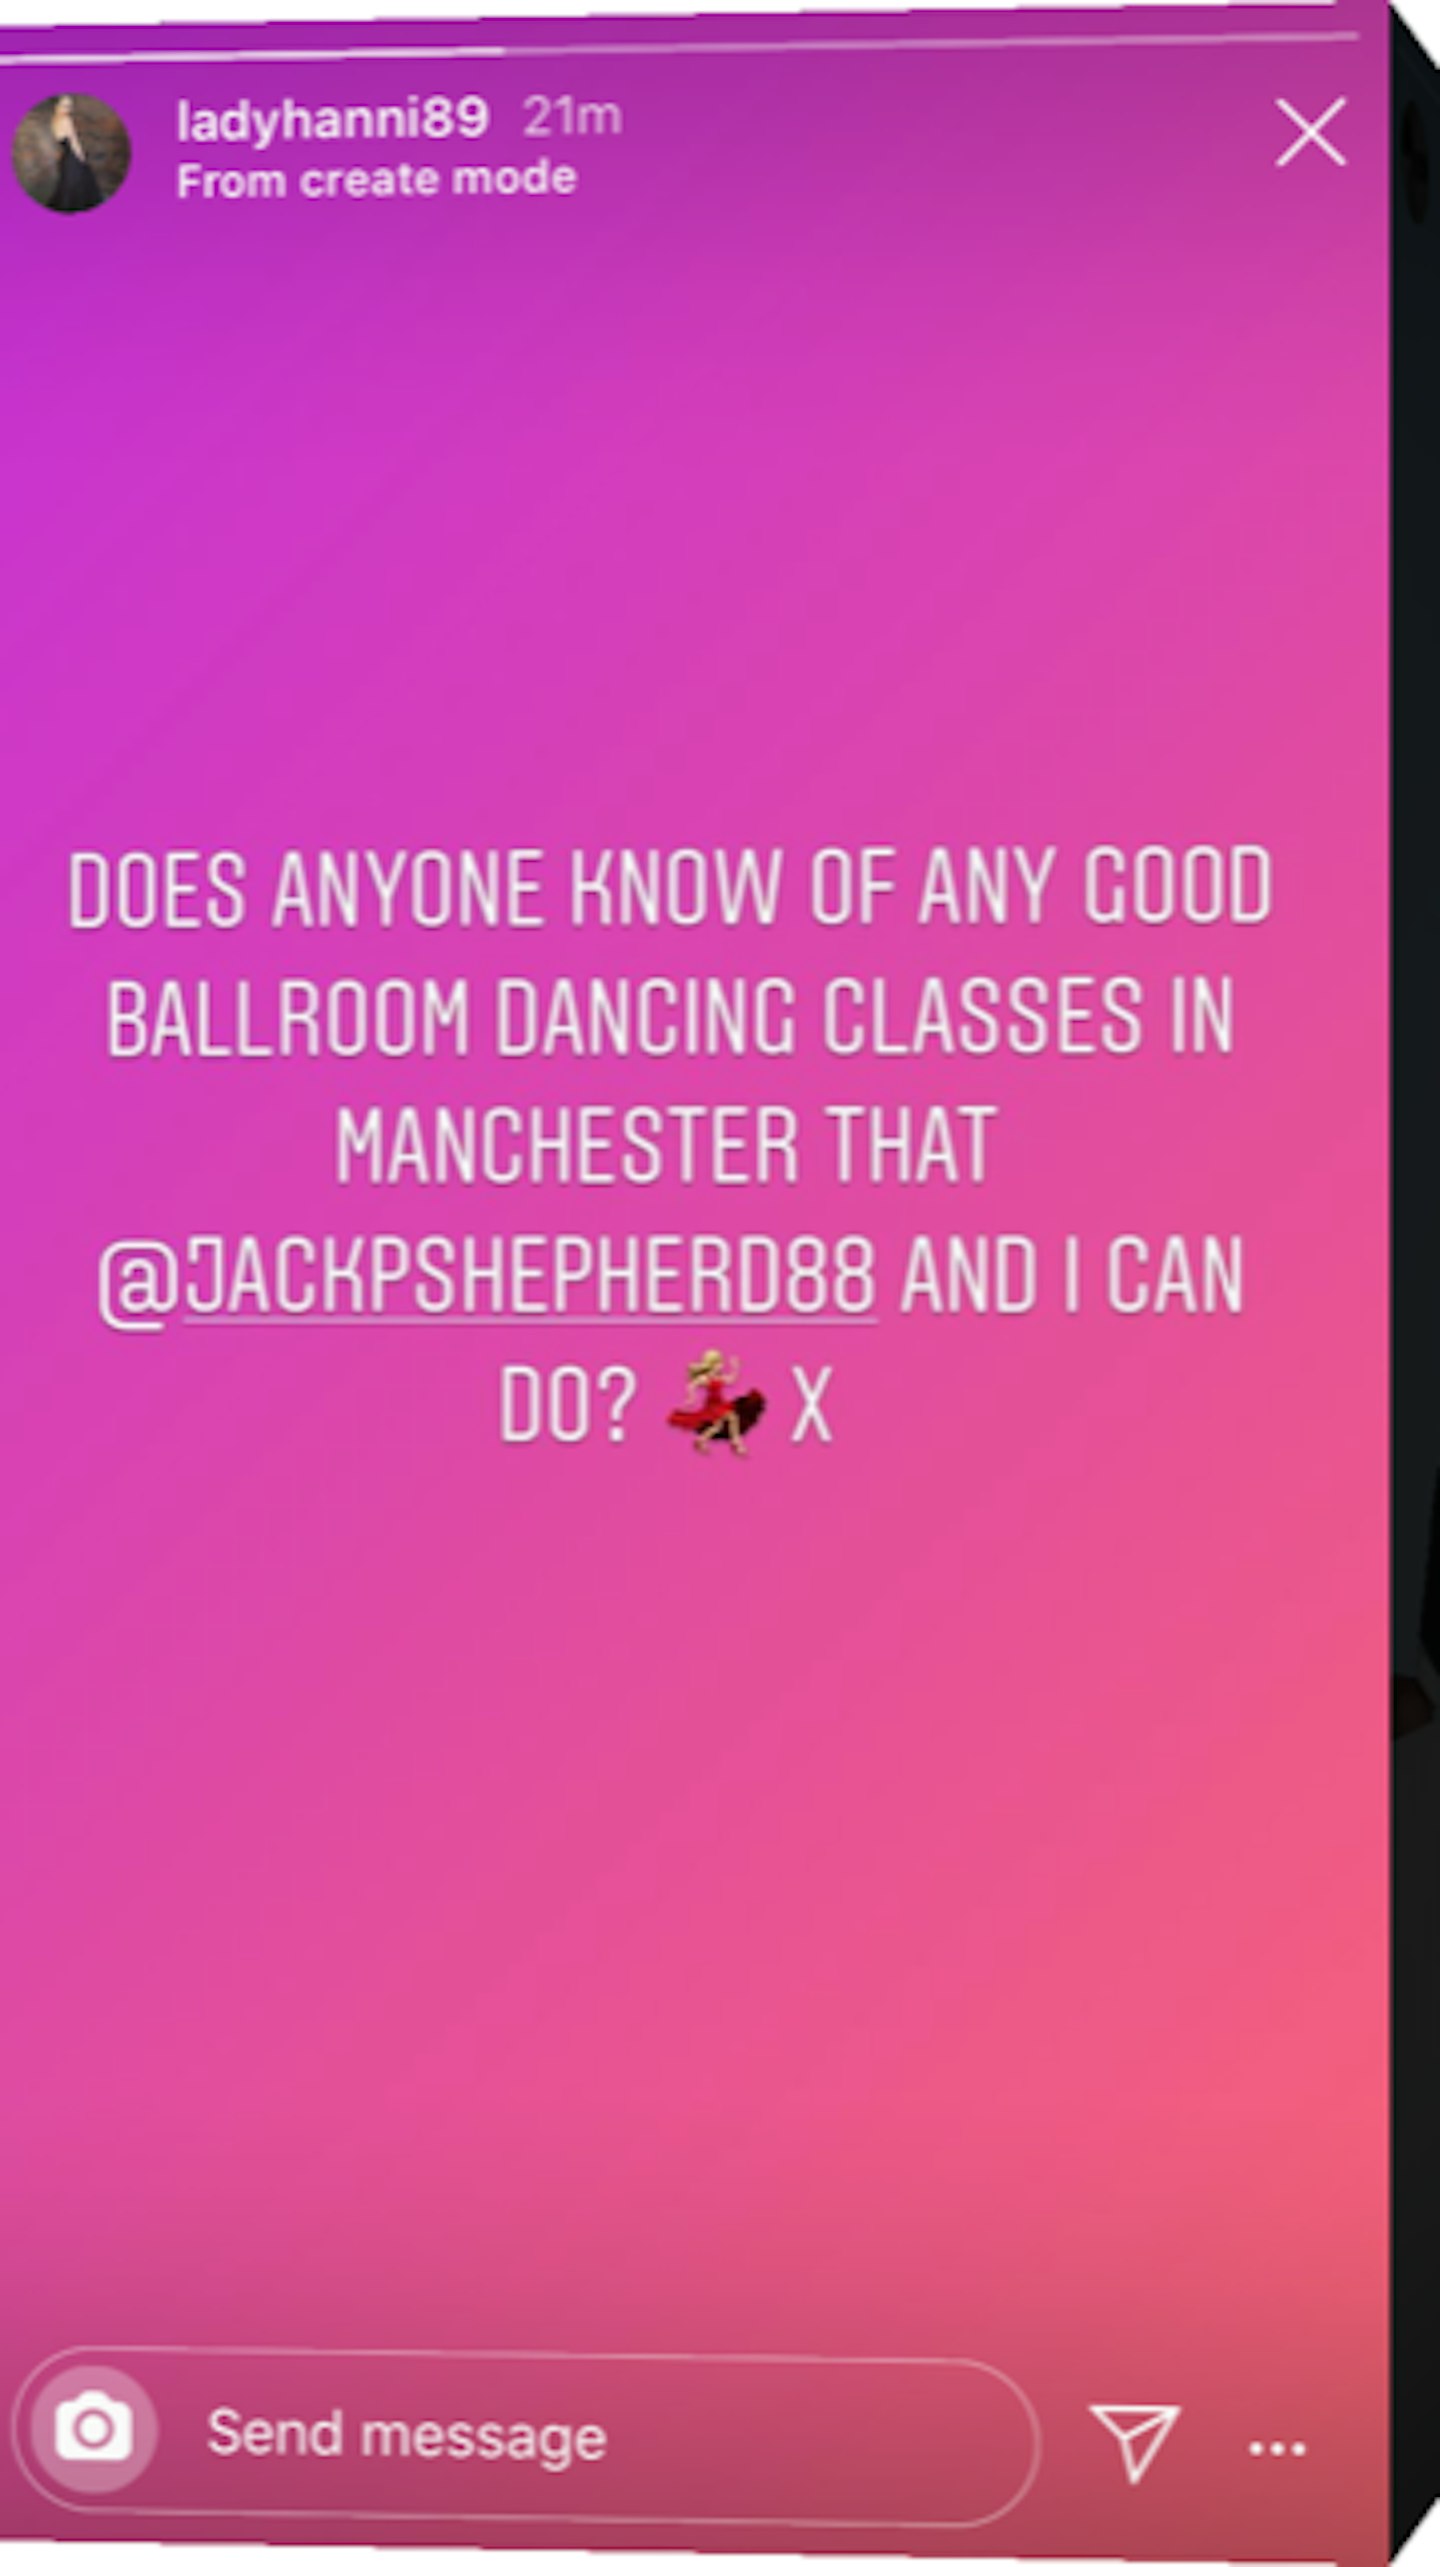 Hanni Treeweek posts about ballroom dancing lessons